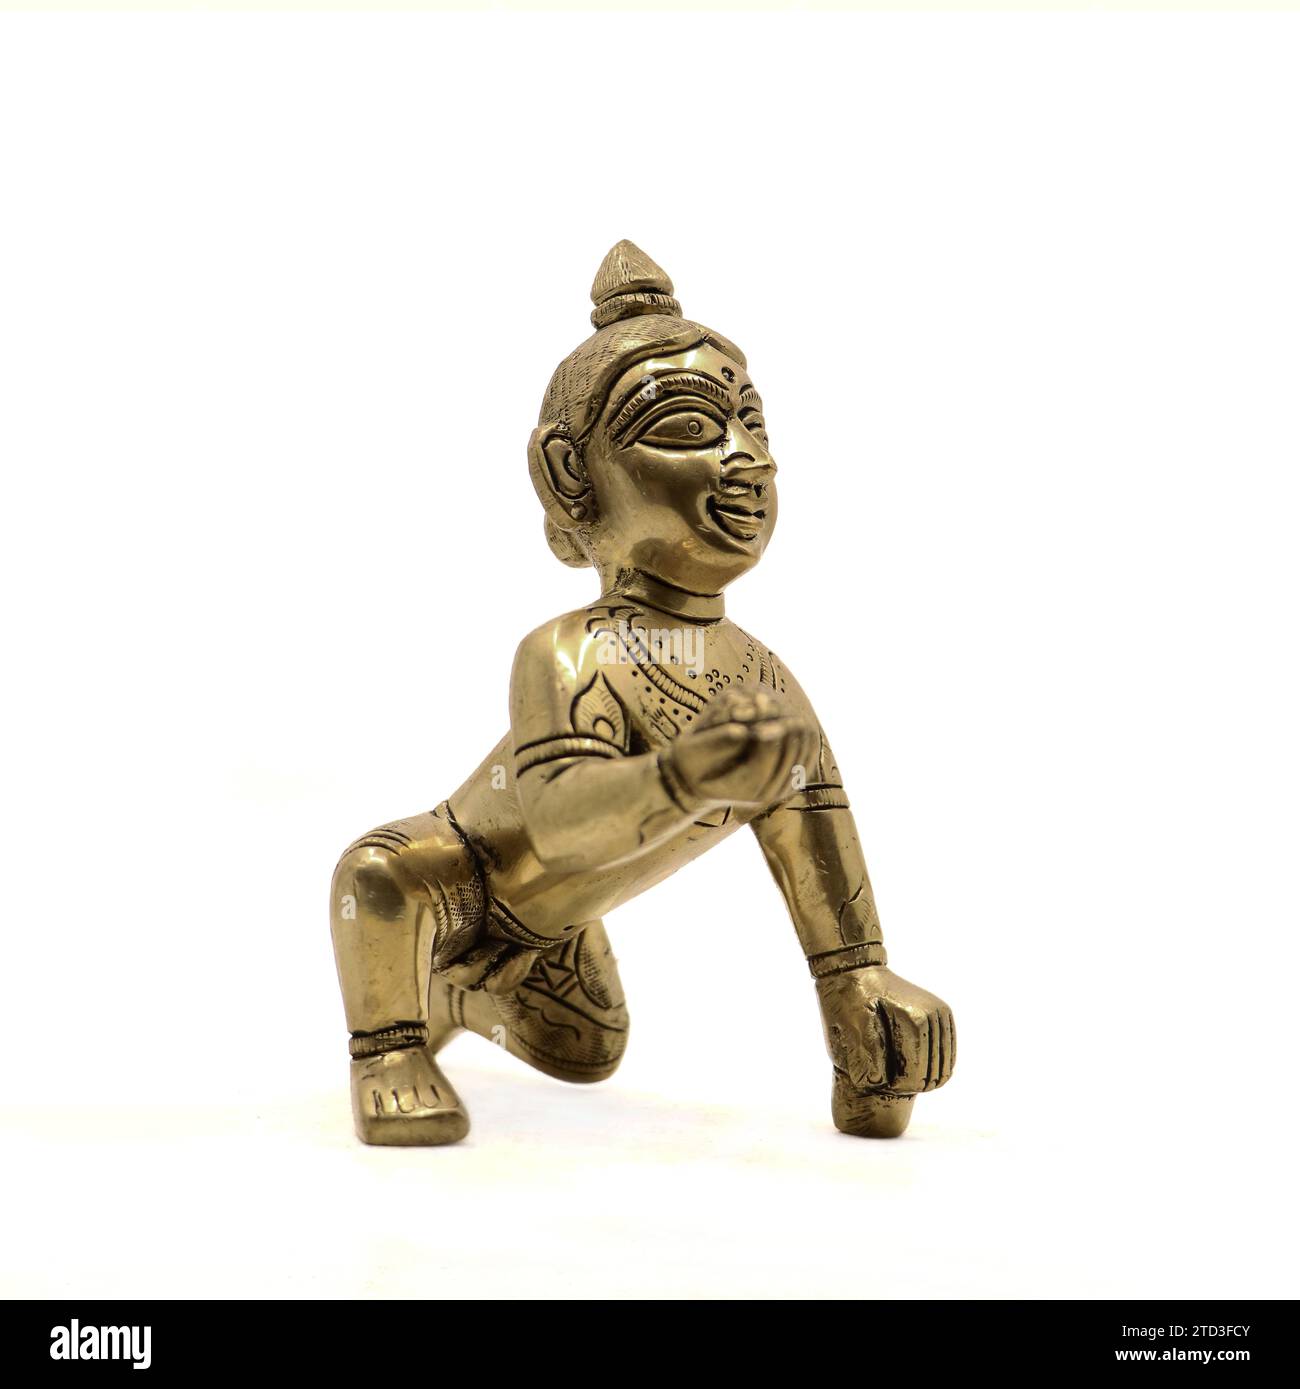 vintage golden figure of crawling baby lord krishna also called gopal with sweet laddu in his hand isolated in a white background Stock Photo